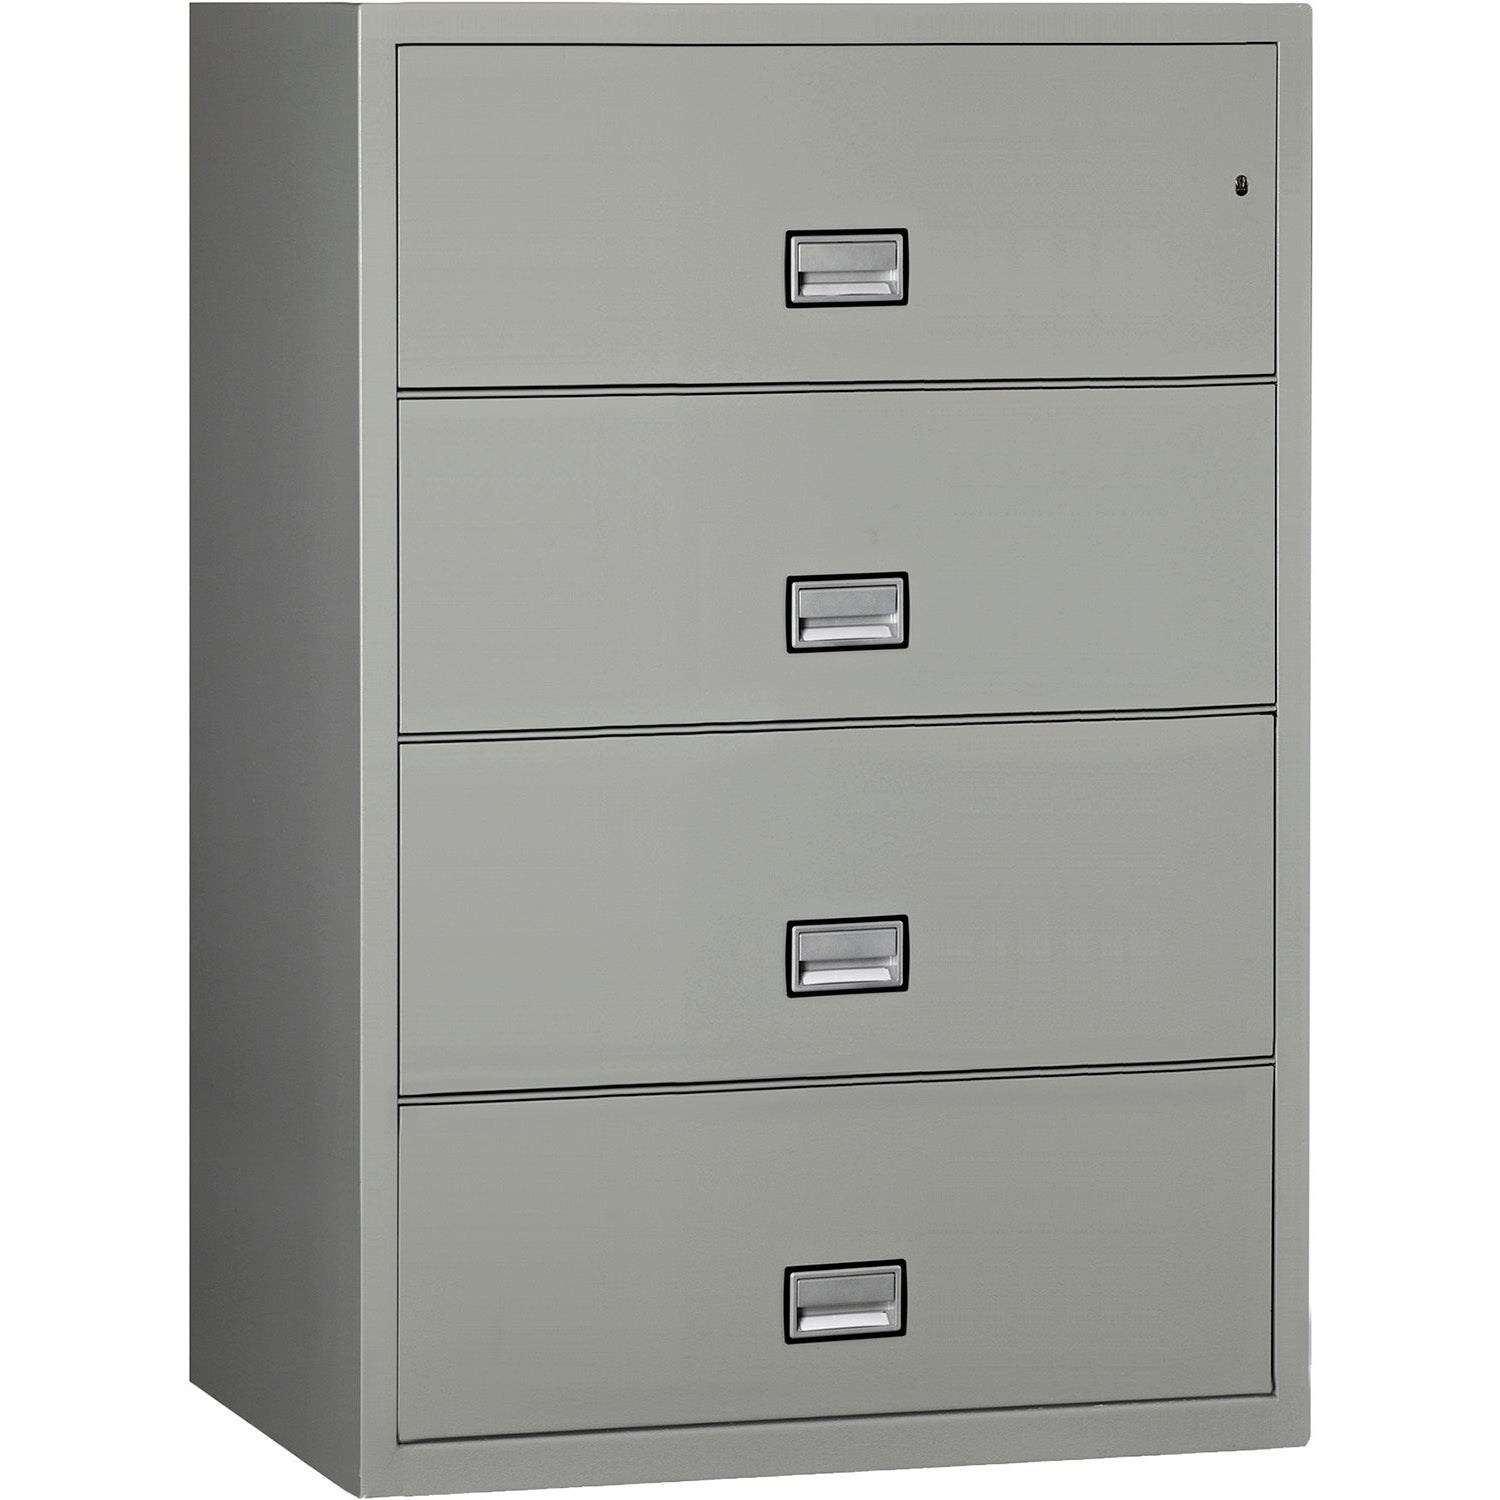 Phoenix Safe Damaged Lateral 38 inch 4-Drawer Fireproof File Cabinet with Water Seal, LAT4W38